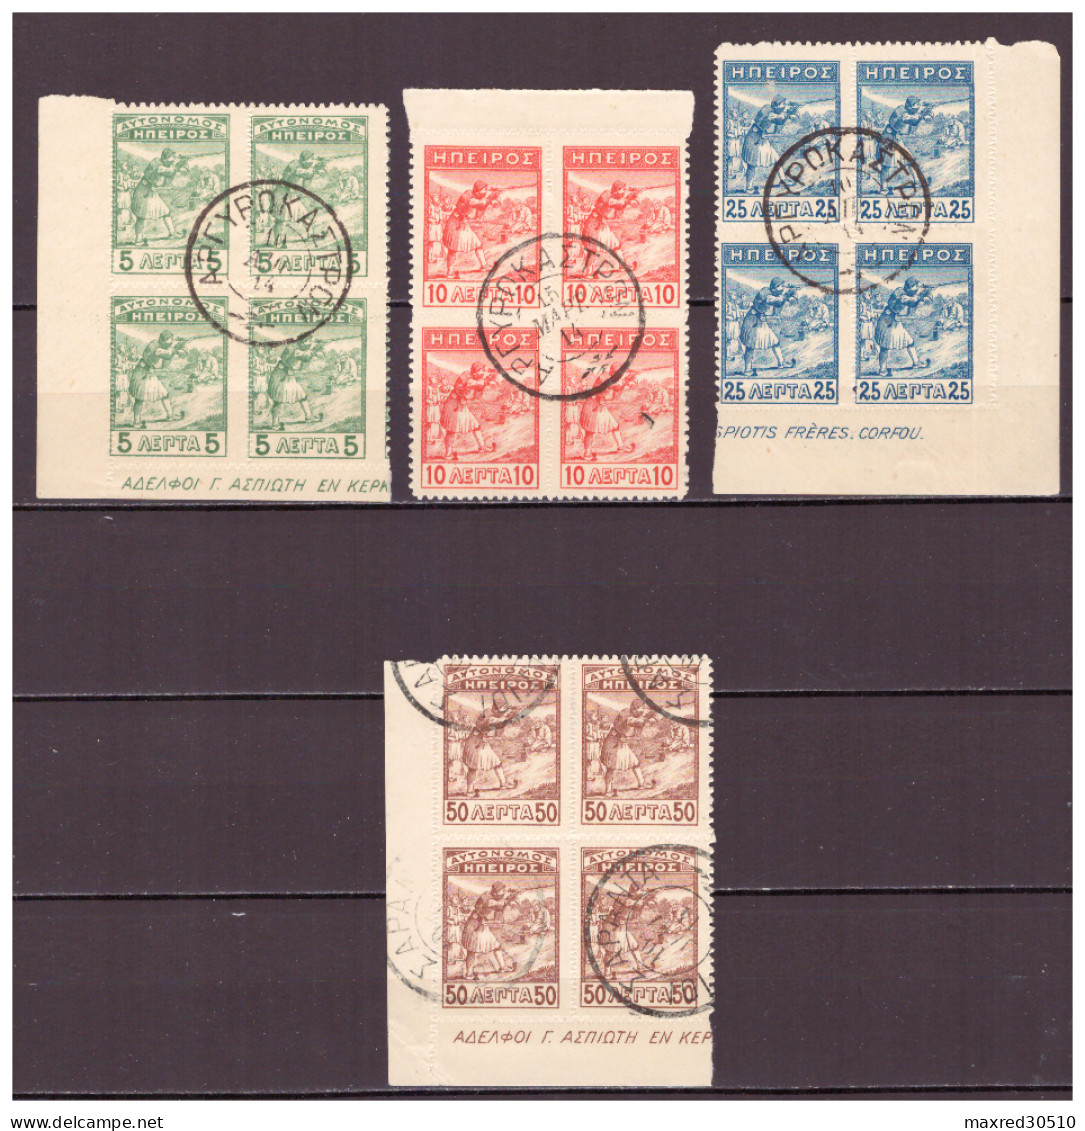 GREECE AUTONOMOUS EPIRUS 1914 4 VALUES FROM THE SET "MARKSMEN" IN BLOCKS OF 4 CANCELLED TO ORDER WITH, SEE DESCRIPTION. - Epiro Del Norte